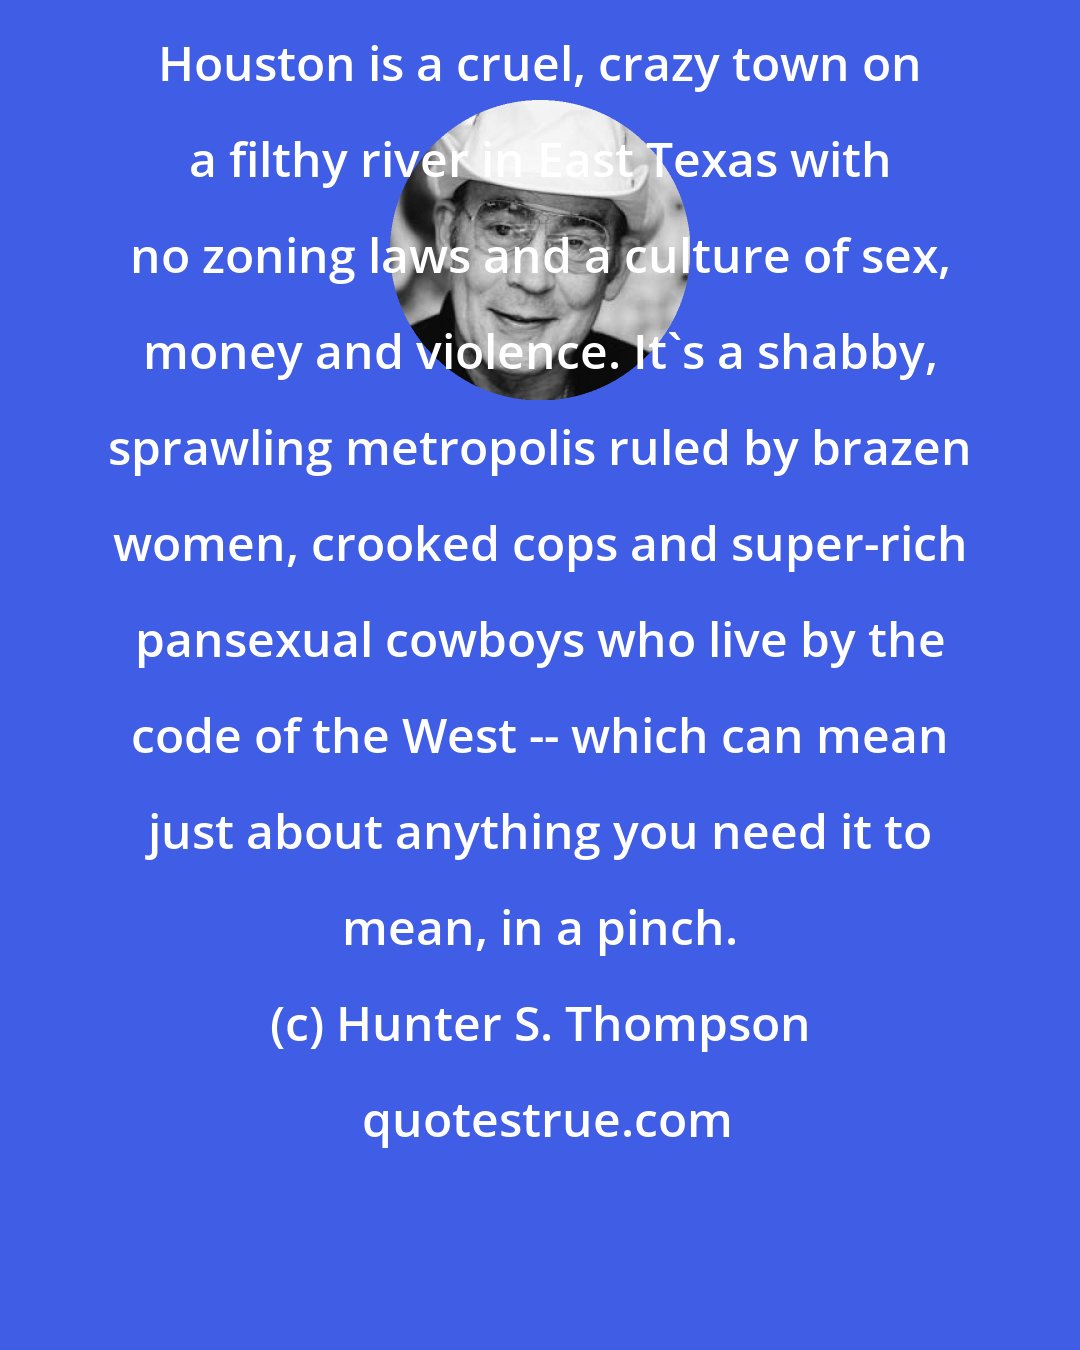 Hunter S. Thompson: Houston is a cruel, crazy town on a filthy river in East Texas with no zoning laws and a culture of sex, money and violence. It's a shabby, sprawling metropolis ruled by brazen women, crooked cops and super-rich pansexual cowboys who live by the code of the West -- which can mean just about anything you need it to mean, in a pinch.